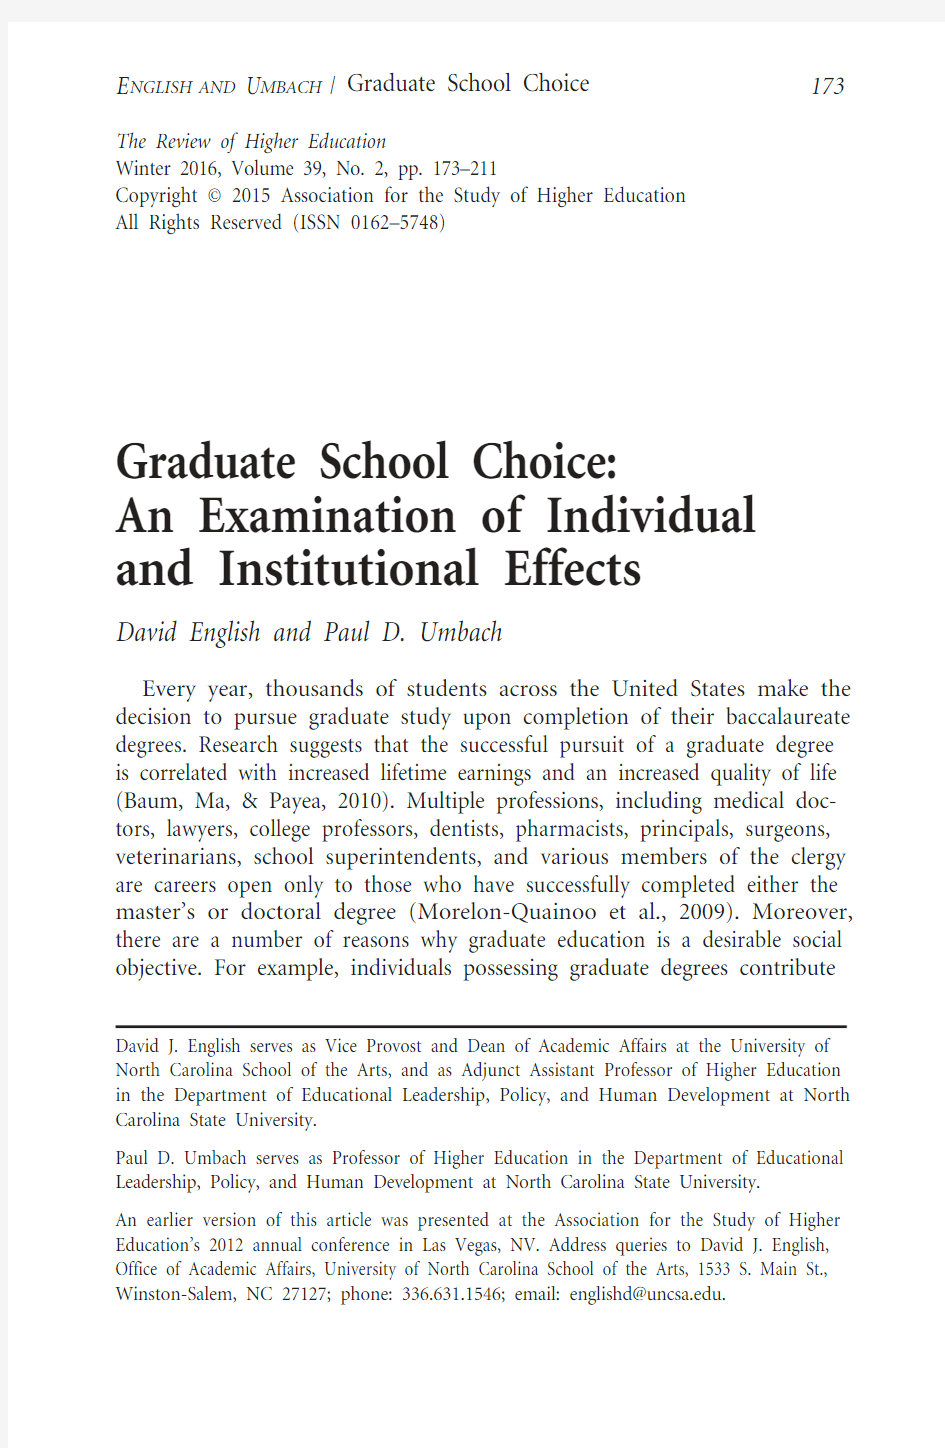 Graduate school choice_an examination of individual and institutional effects